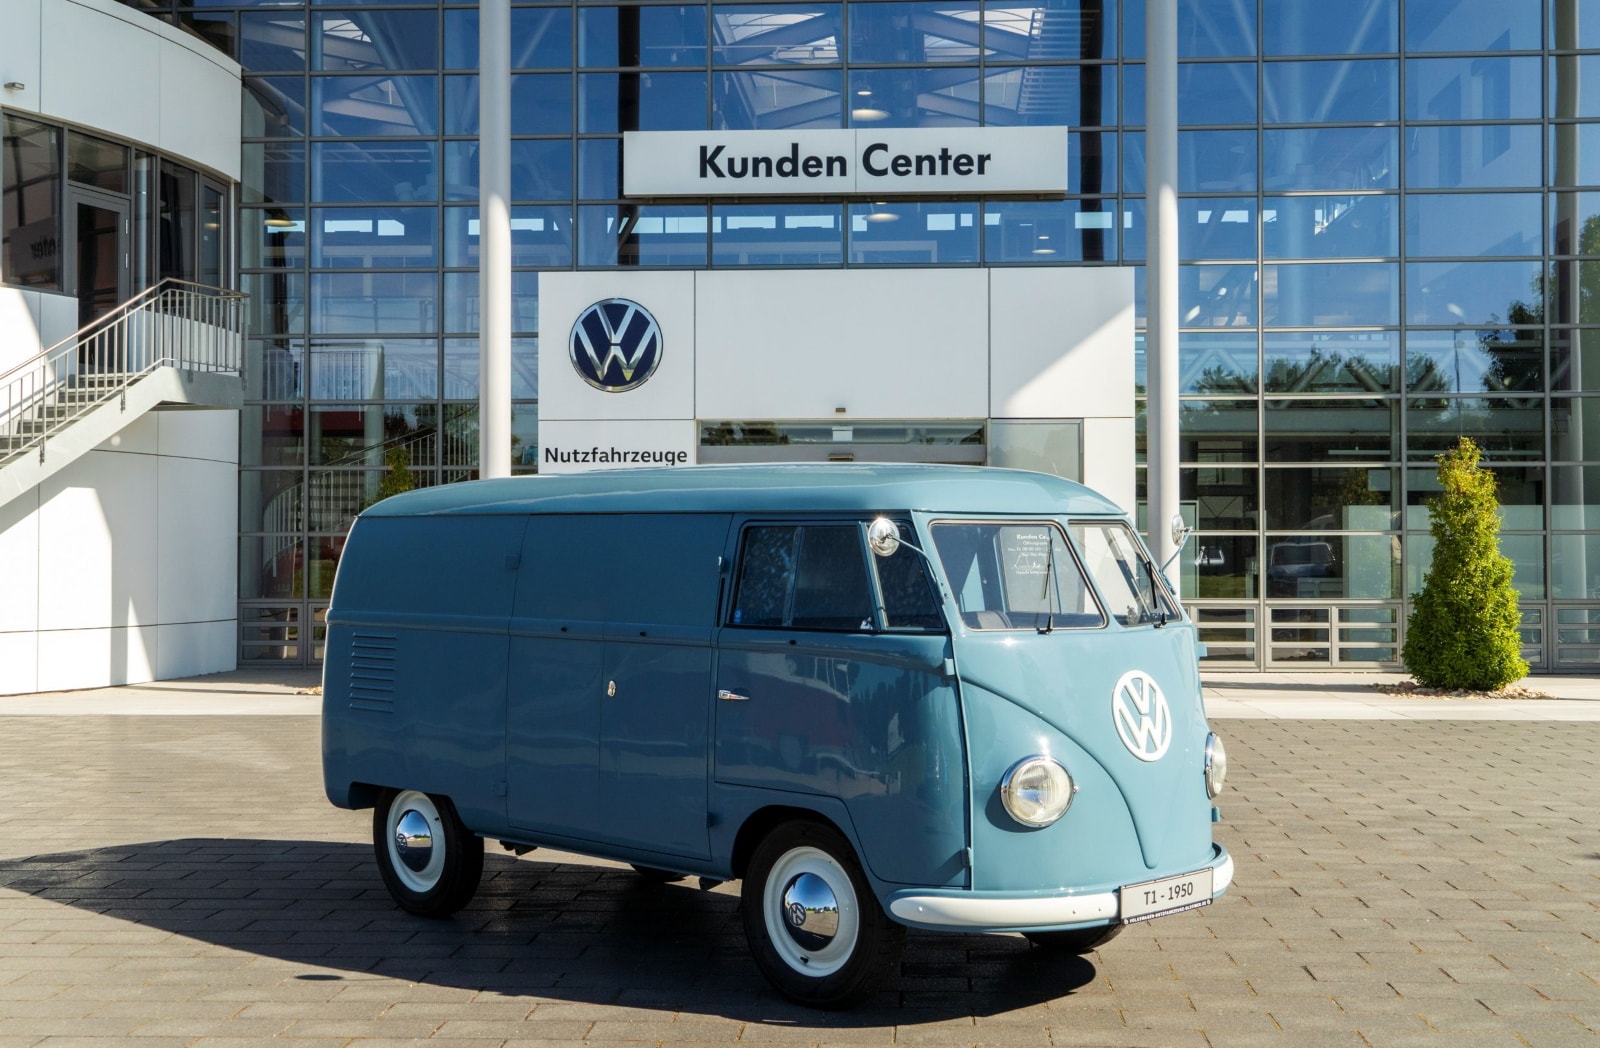 Sofie, the World's Oldest Volkswagen Bus, Is 70 and Still a